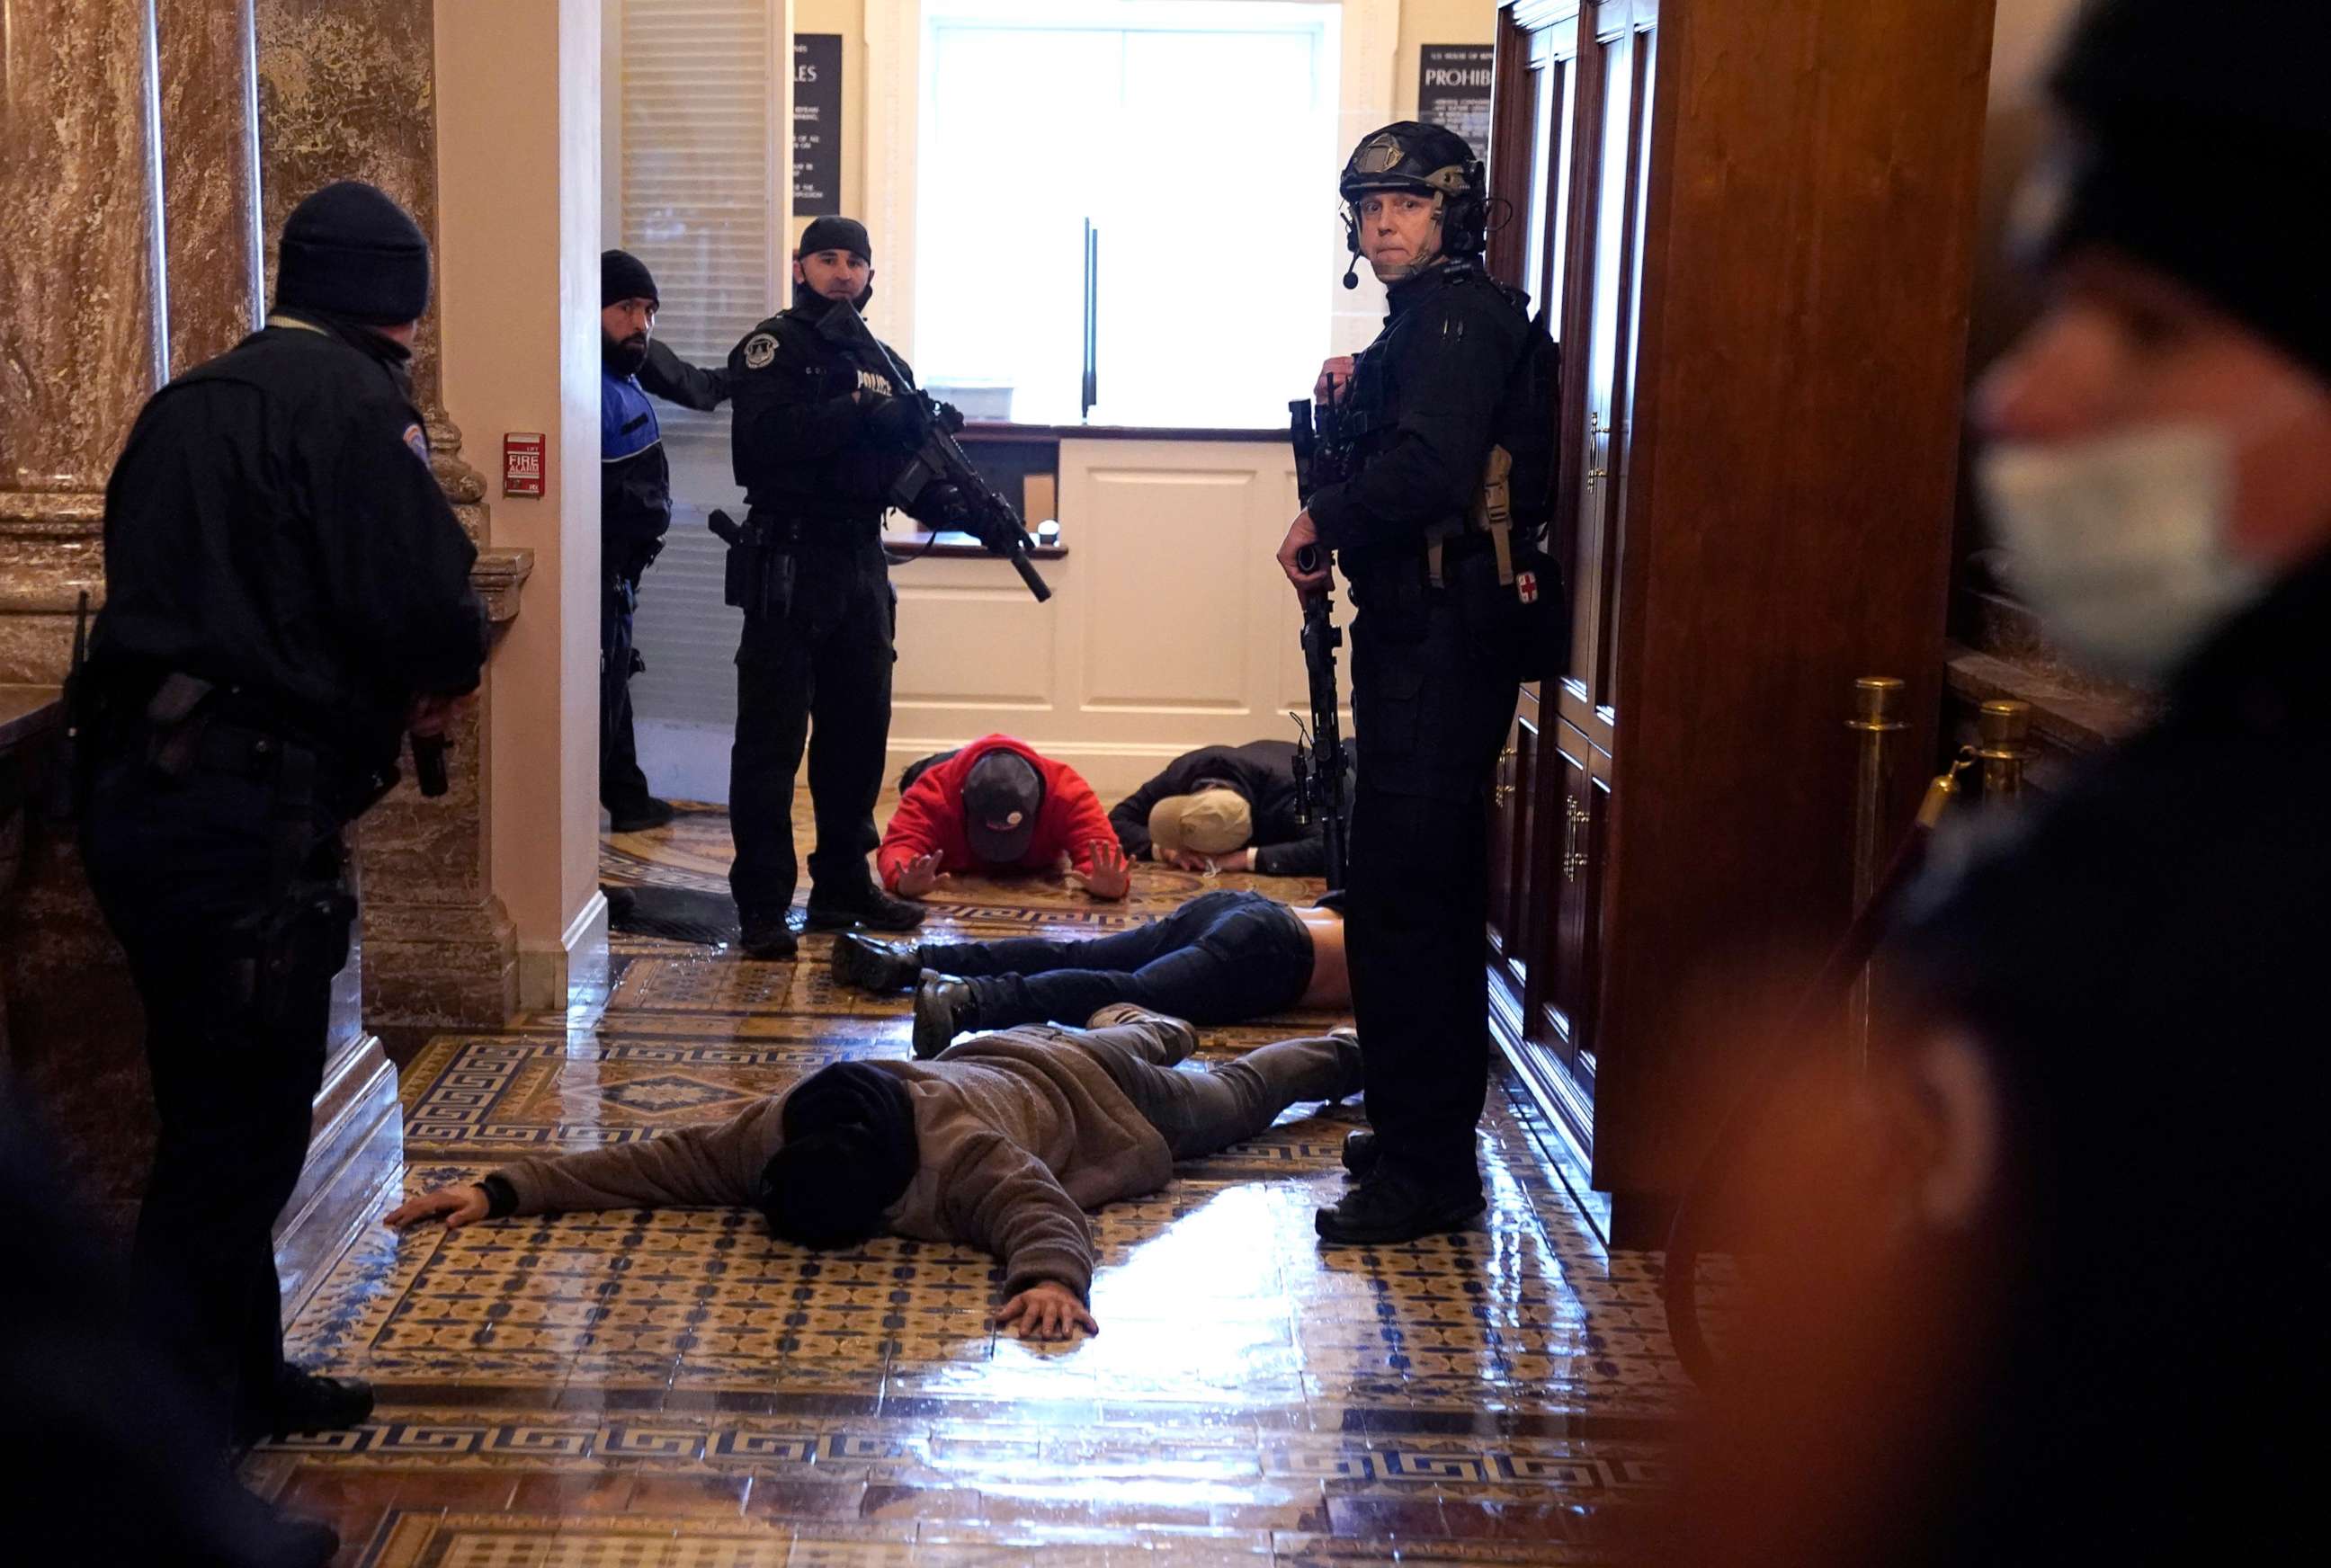 PHOTO: U.S. Capitol Police stand detain protesters outside of the House Chamber during a joint session of Congress on Jan. 6, 2021 in Washington, D.C.